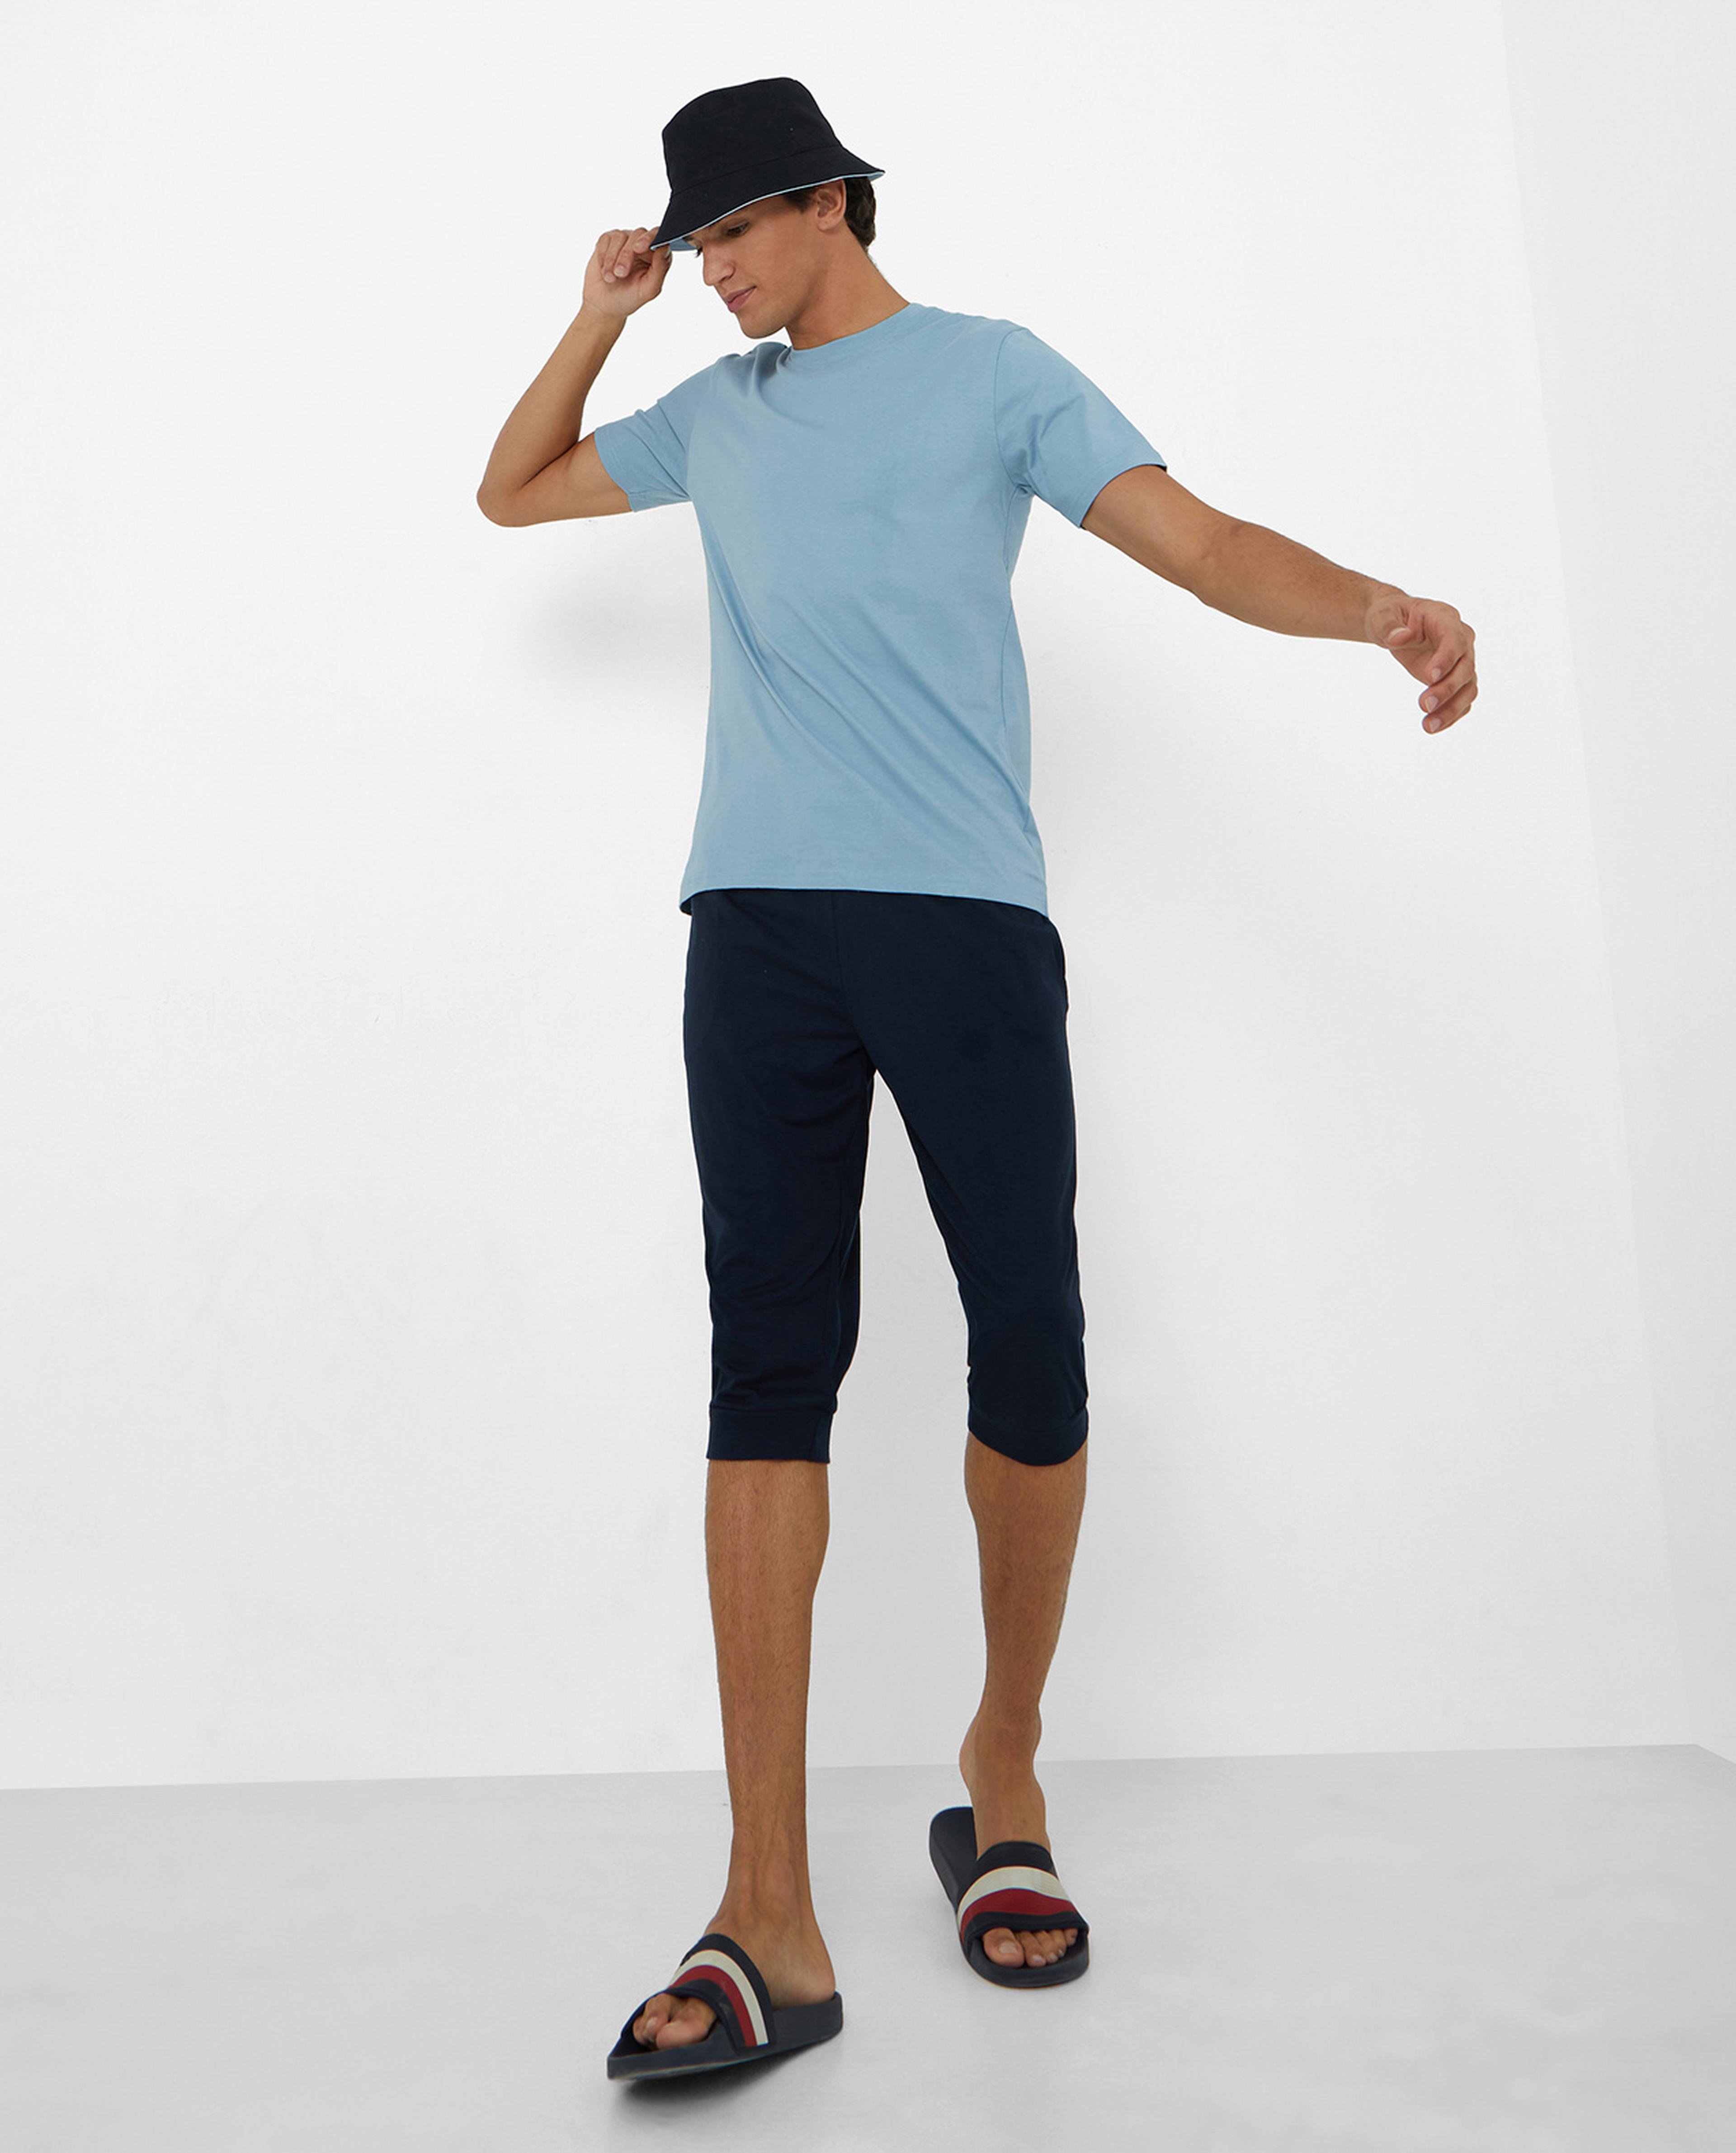 Solid Knee-Length Capris with Elasticated Drawstring Waist